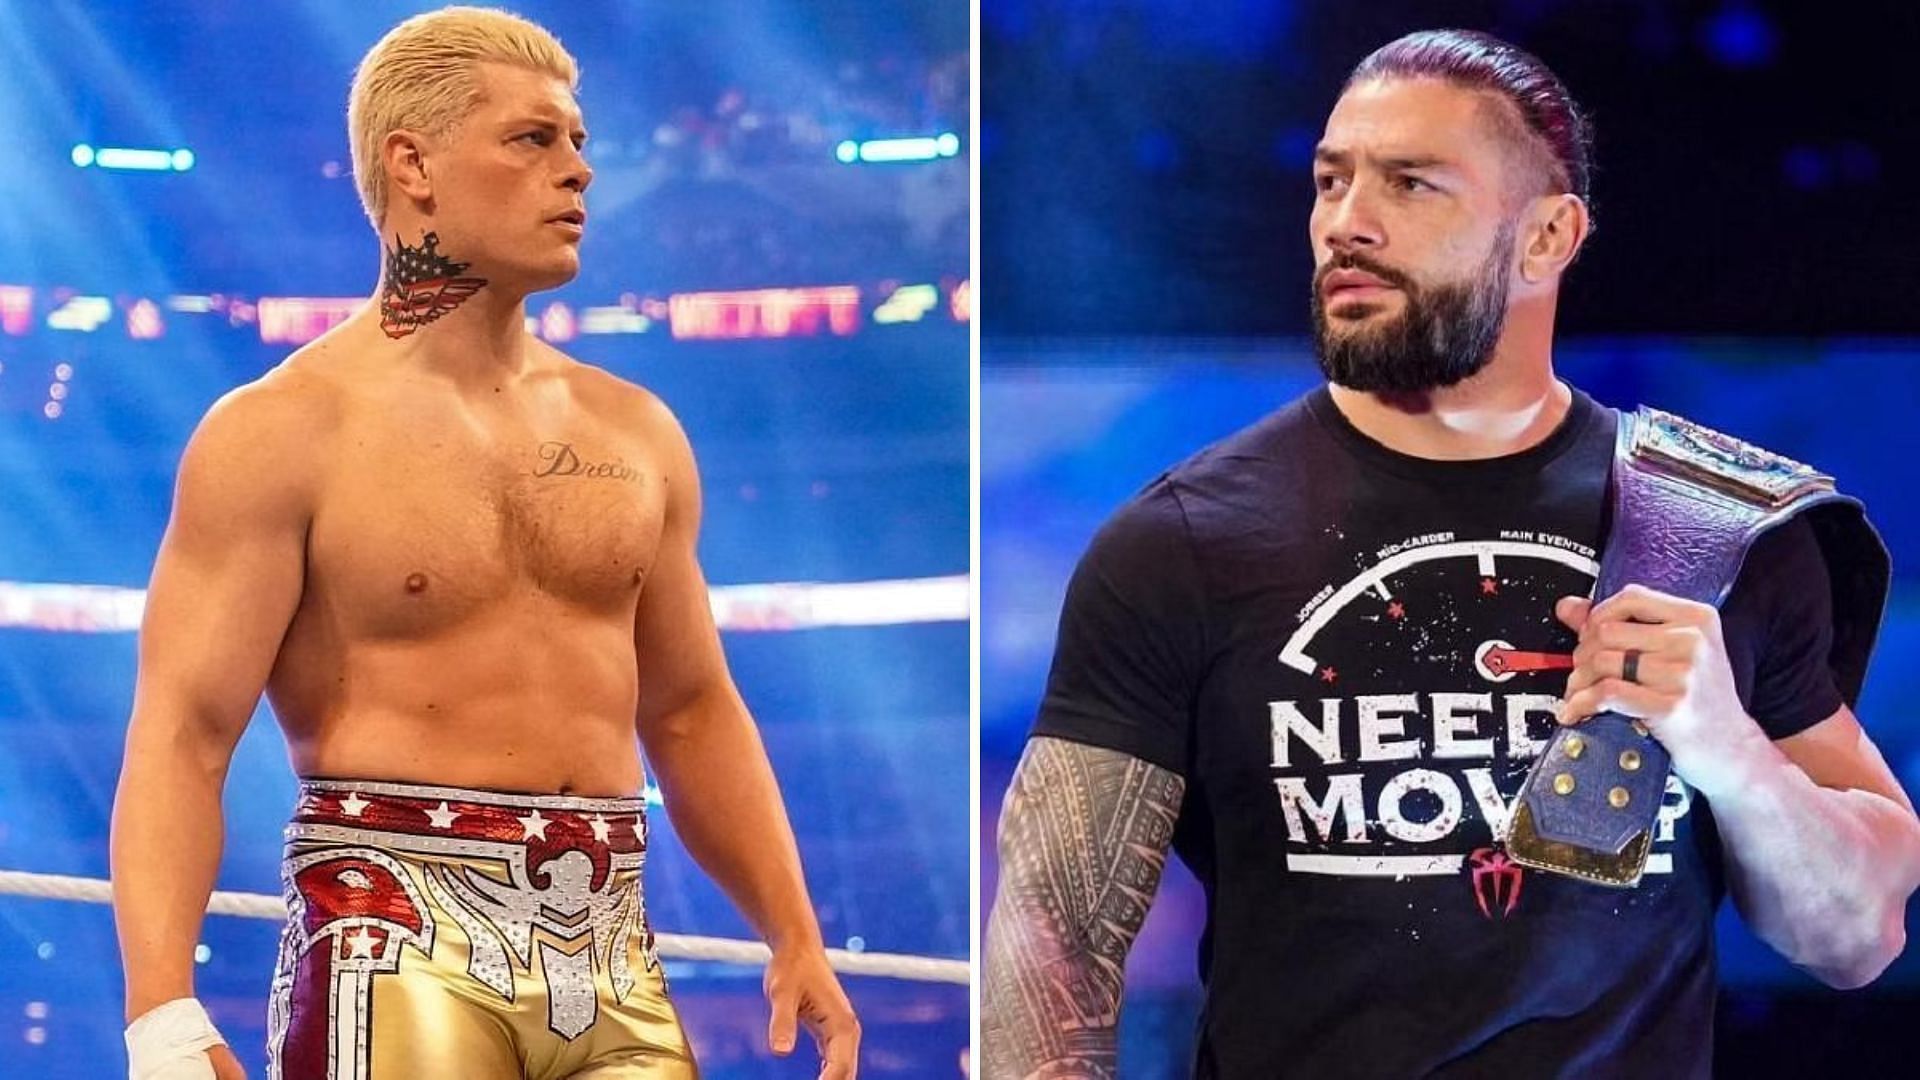 These two could put on a five-star match at the appropriate stage